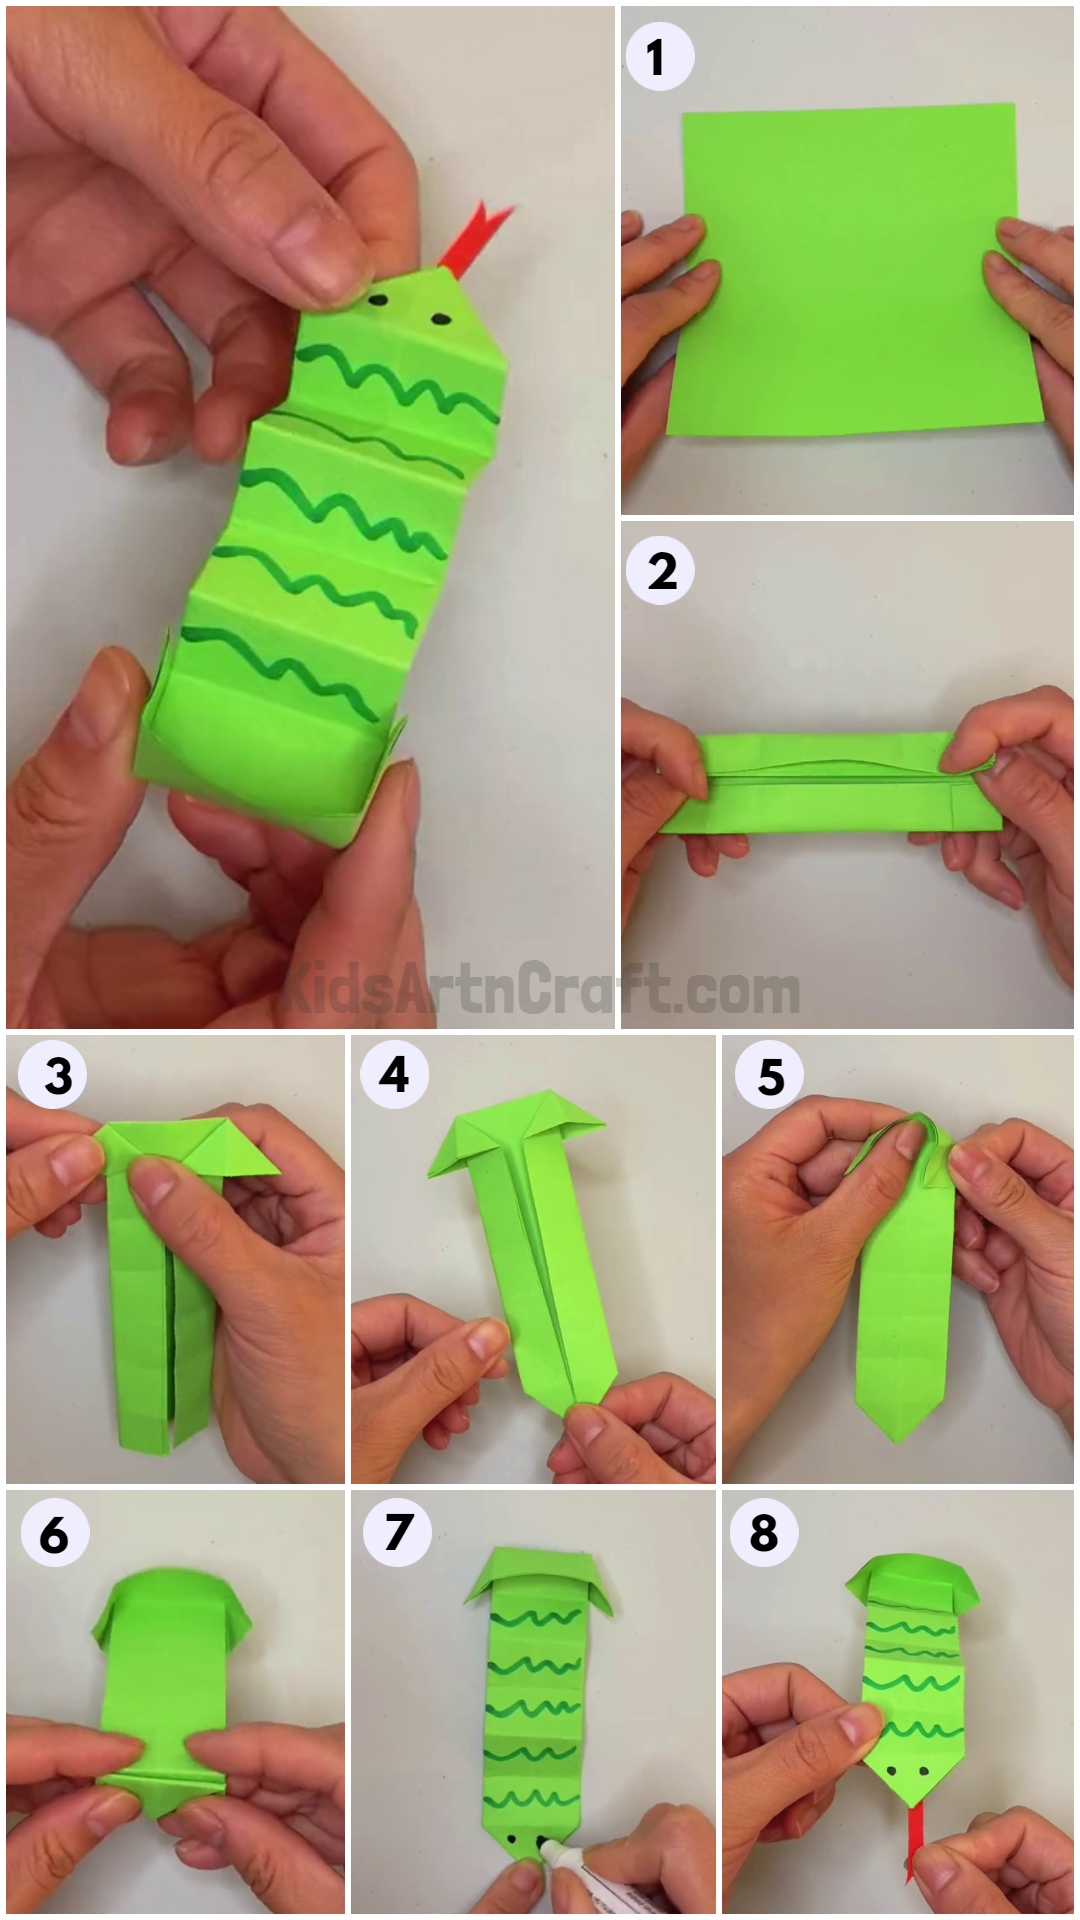  Learn to Make Origami Snake Craft Step-by-Step Tutorial for Kids